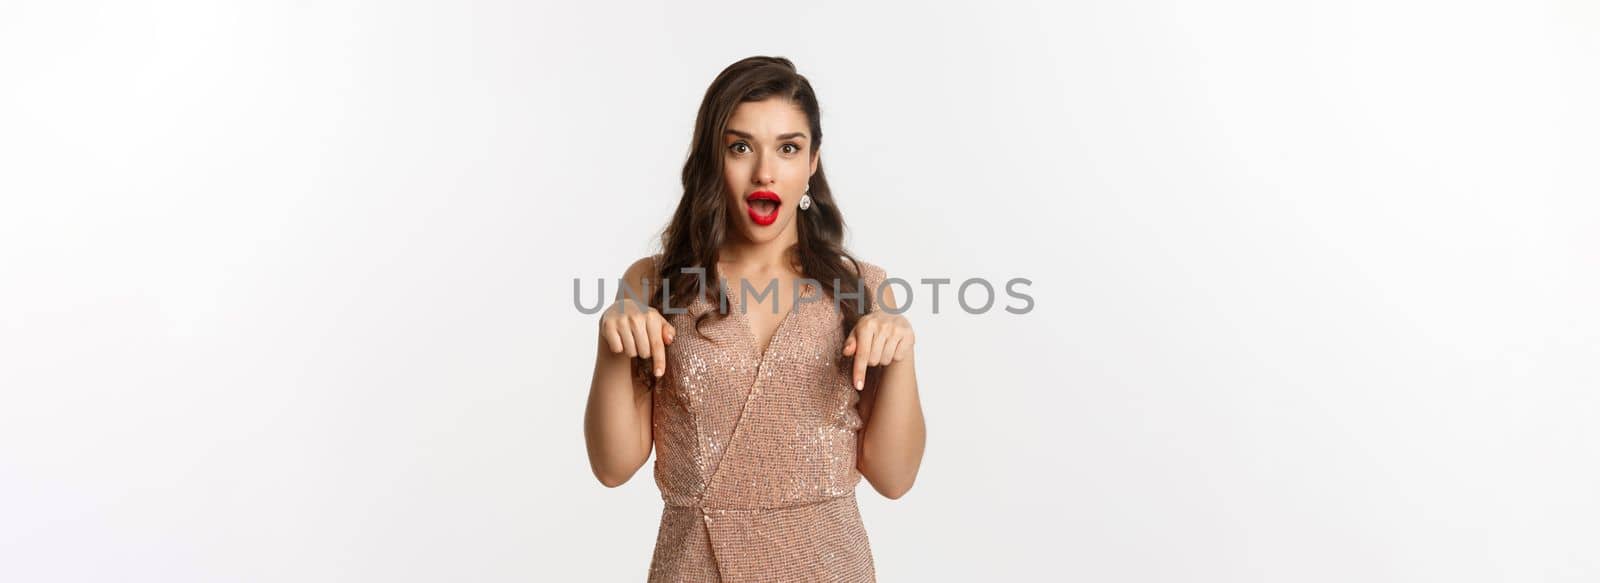 Amazed beautiful woman in glamour dress celebrating christmas party, pointing fingers down at promo, standing over white background.